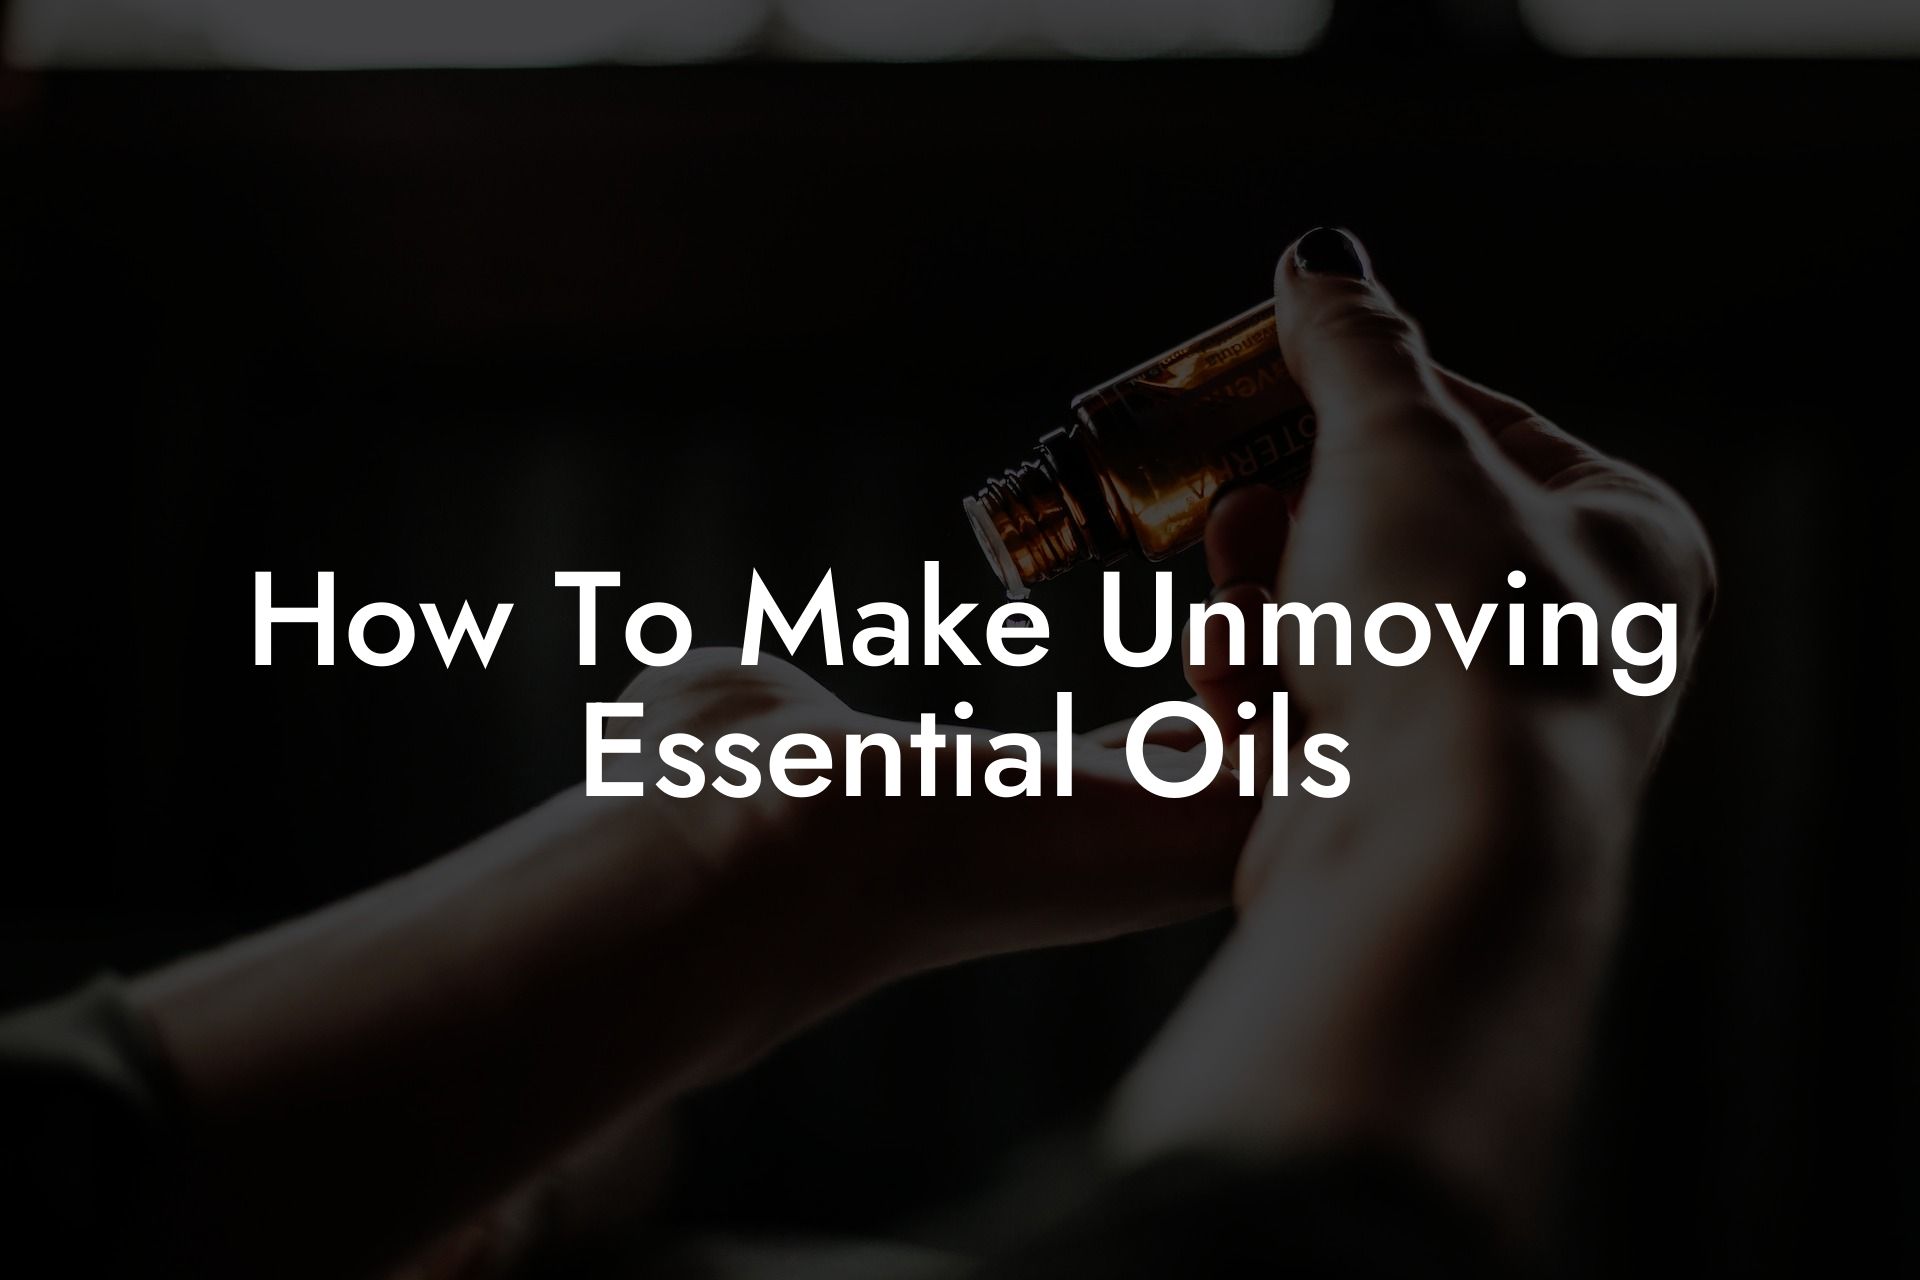 How To Make Unmoving Essential Oils